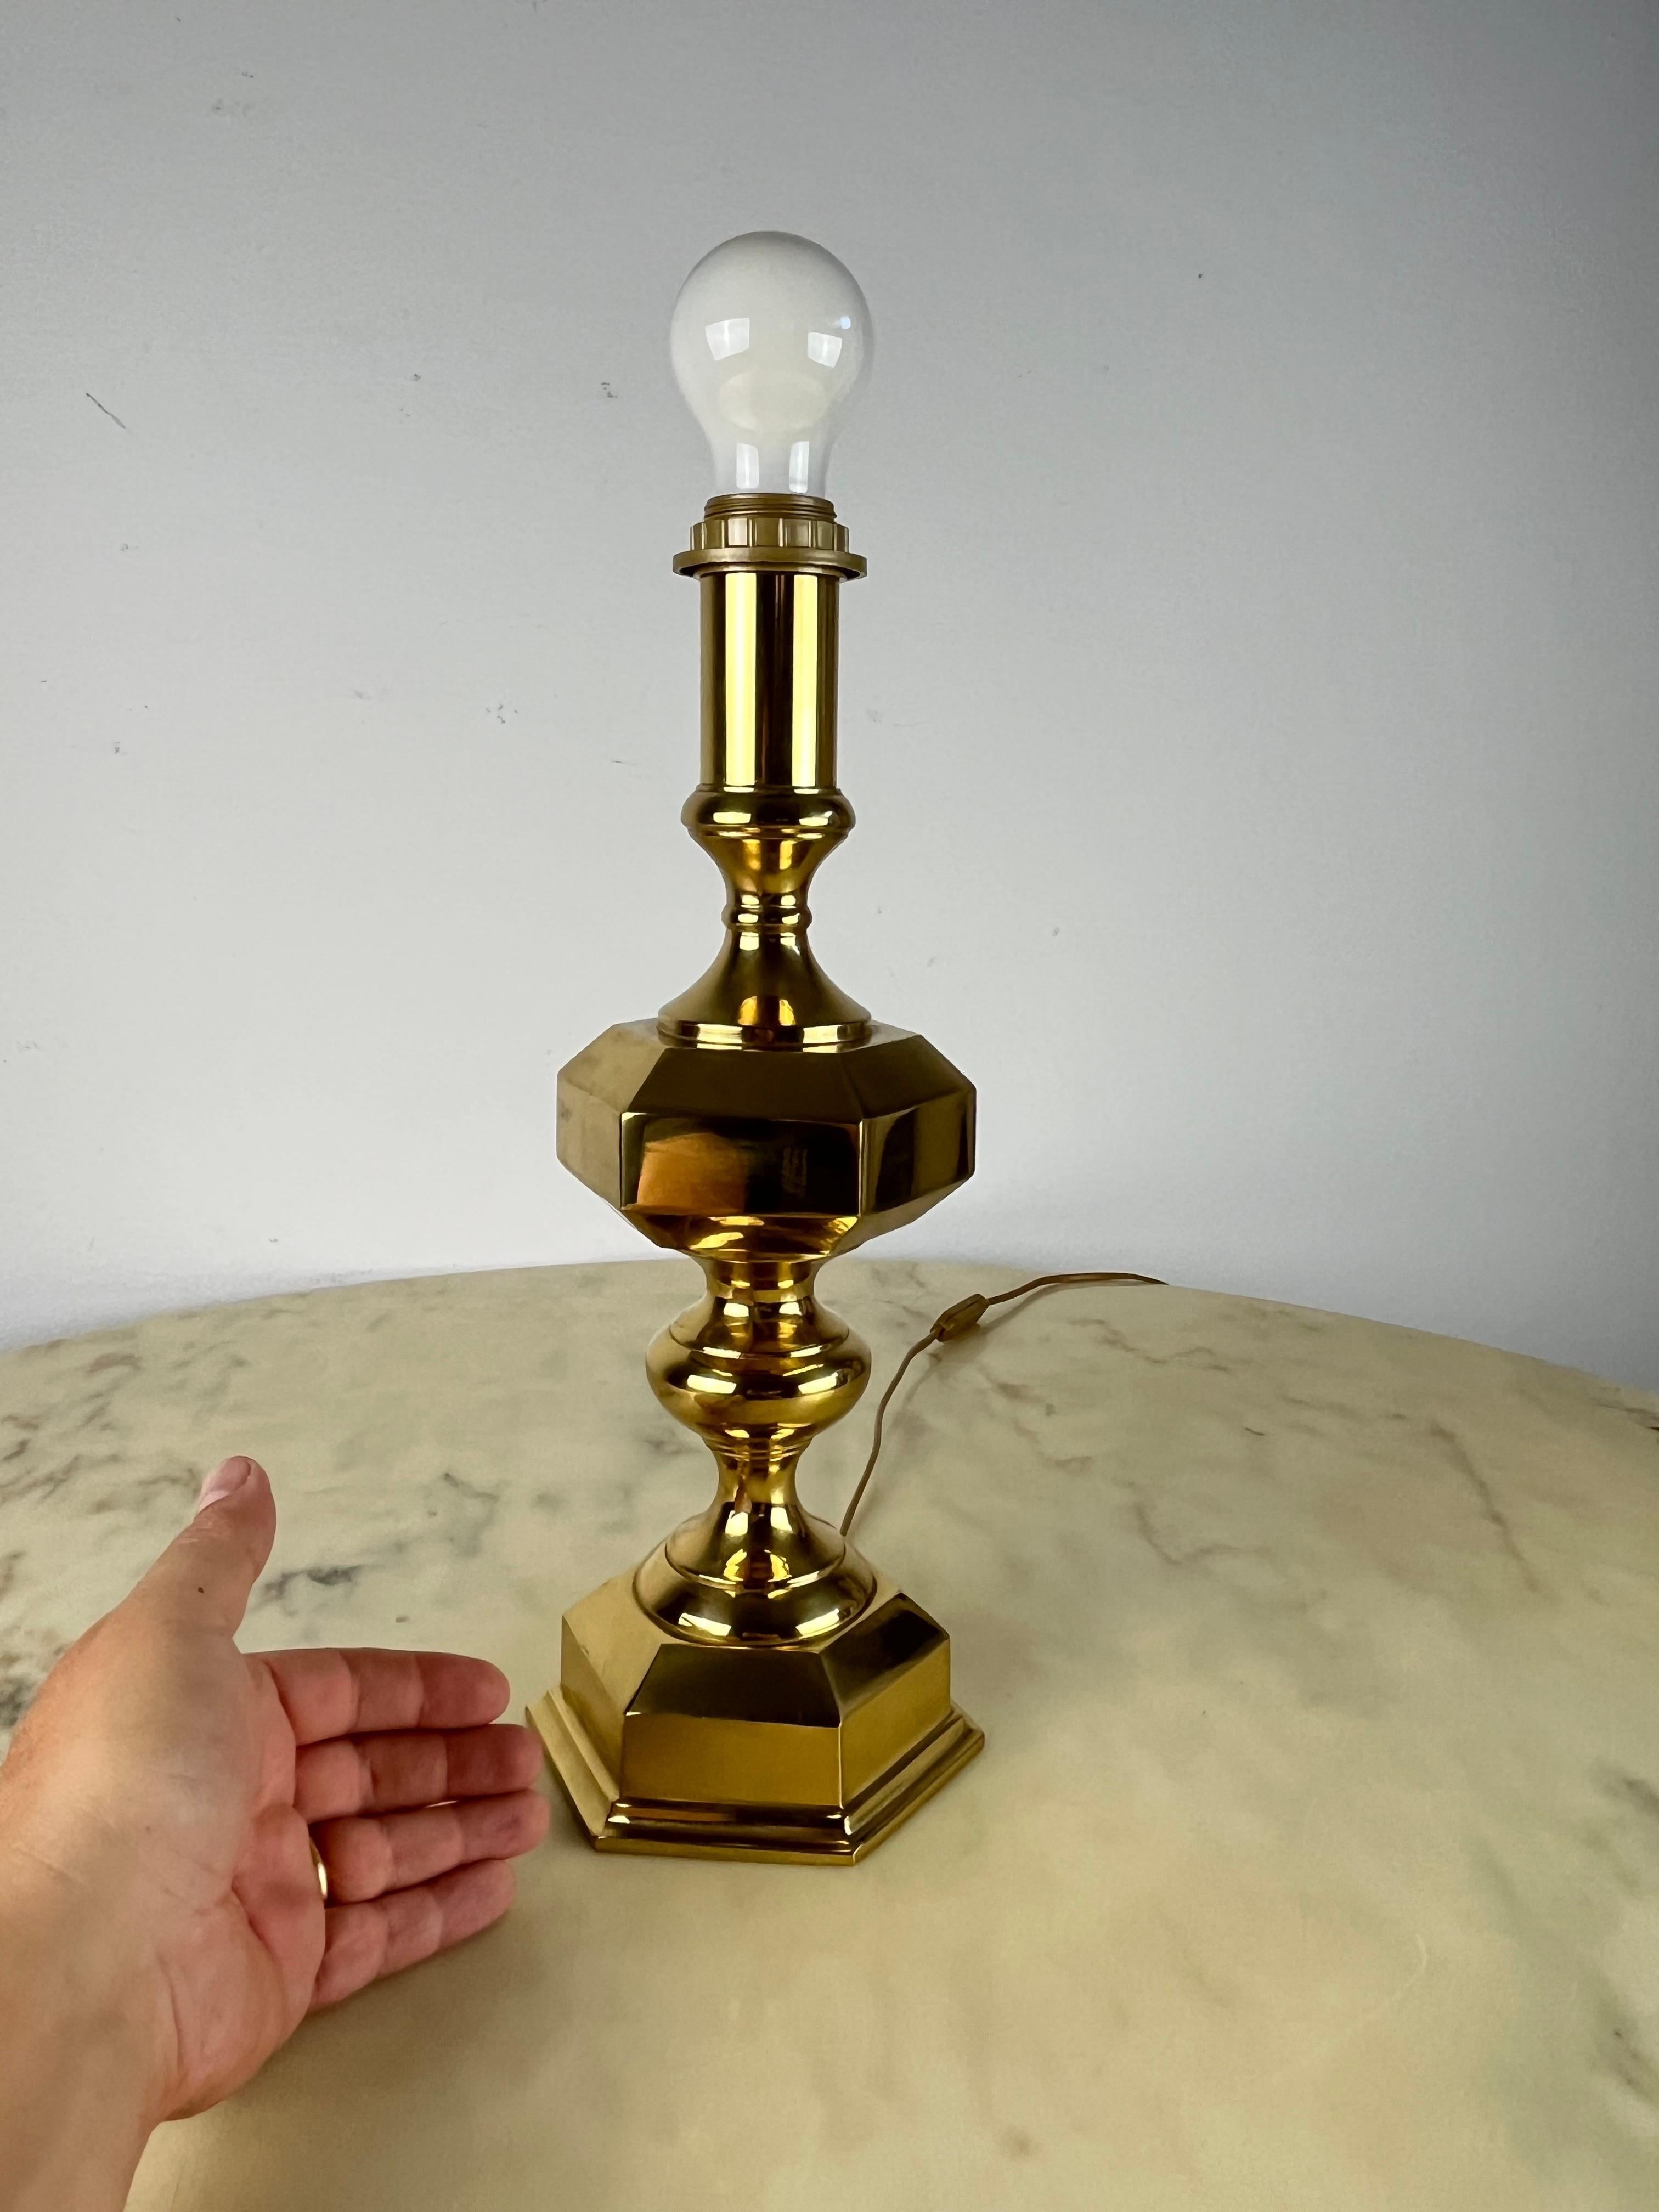 Brass table lamp, Made in Italy, 1980s
Found in a noble apartment, it is intact and functional. E27 lamp. It measures 40 cm in height and base with a diameter of 14 cm.